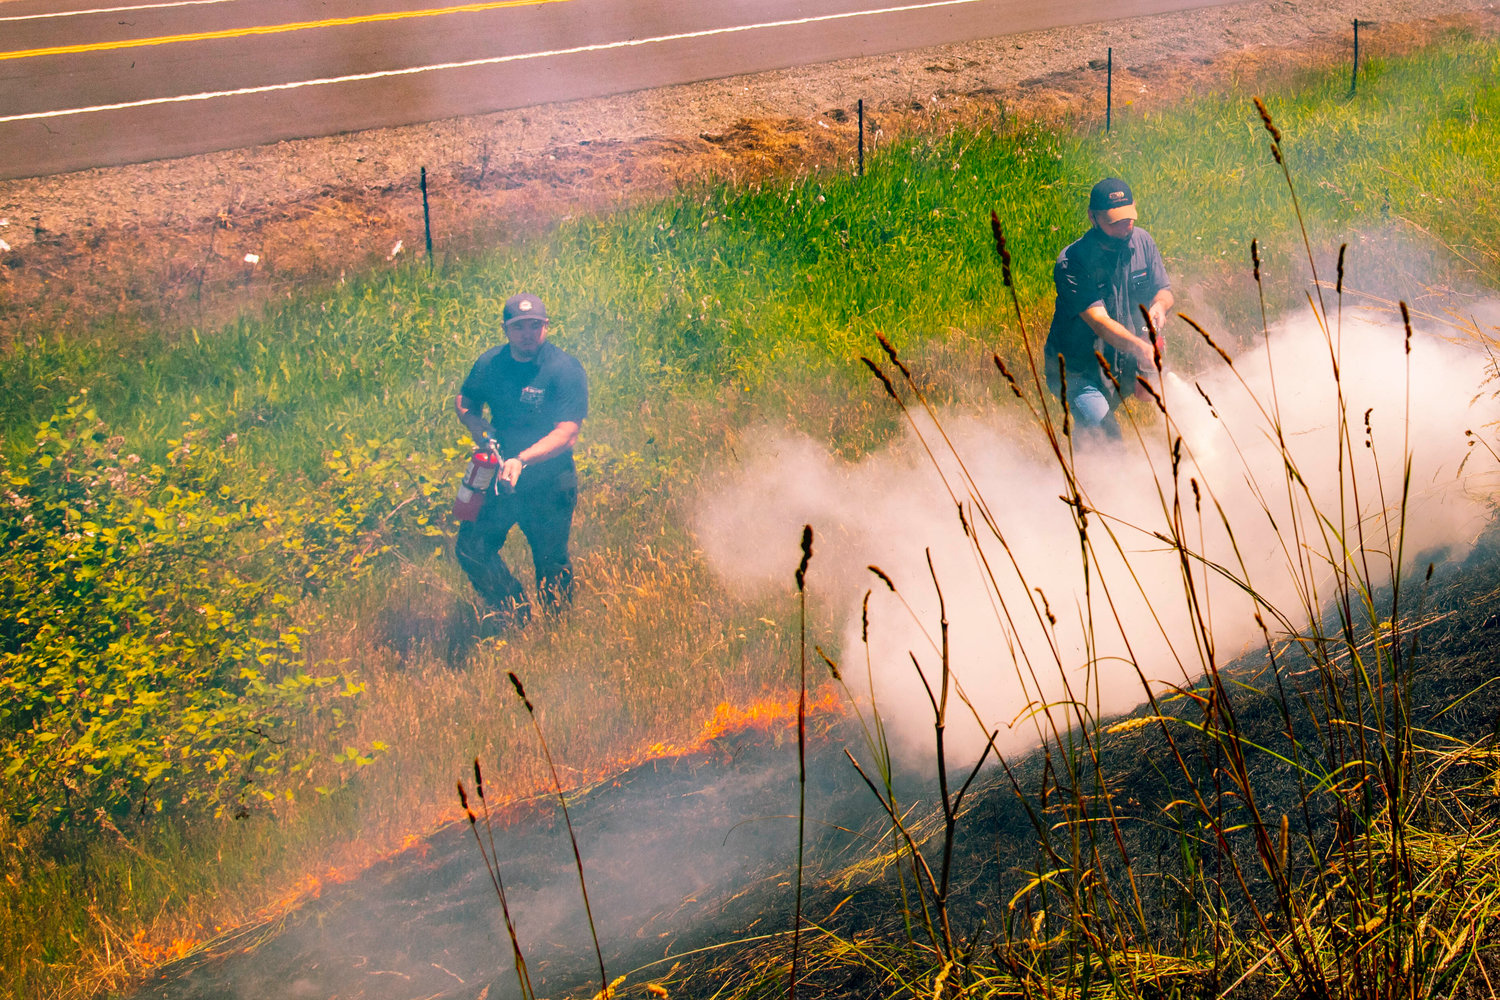 Employees from Awesome Ford and RV in Chehalis use fire extinguishers to put out a brush fire along the northbound lane of Interstate 5 on Tuesday.